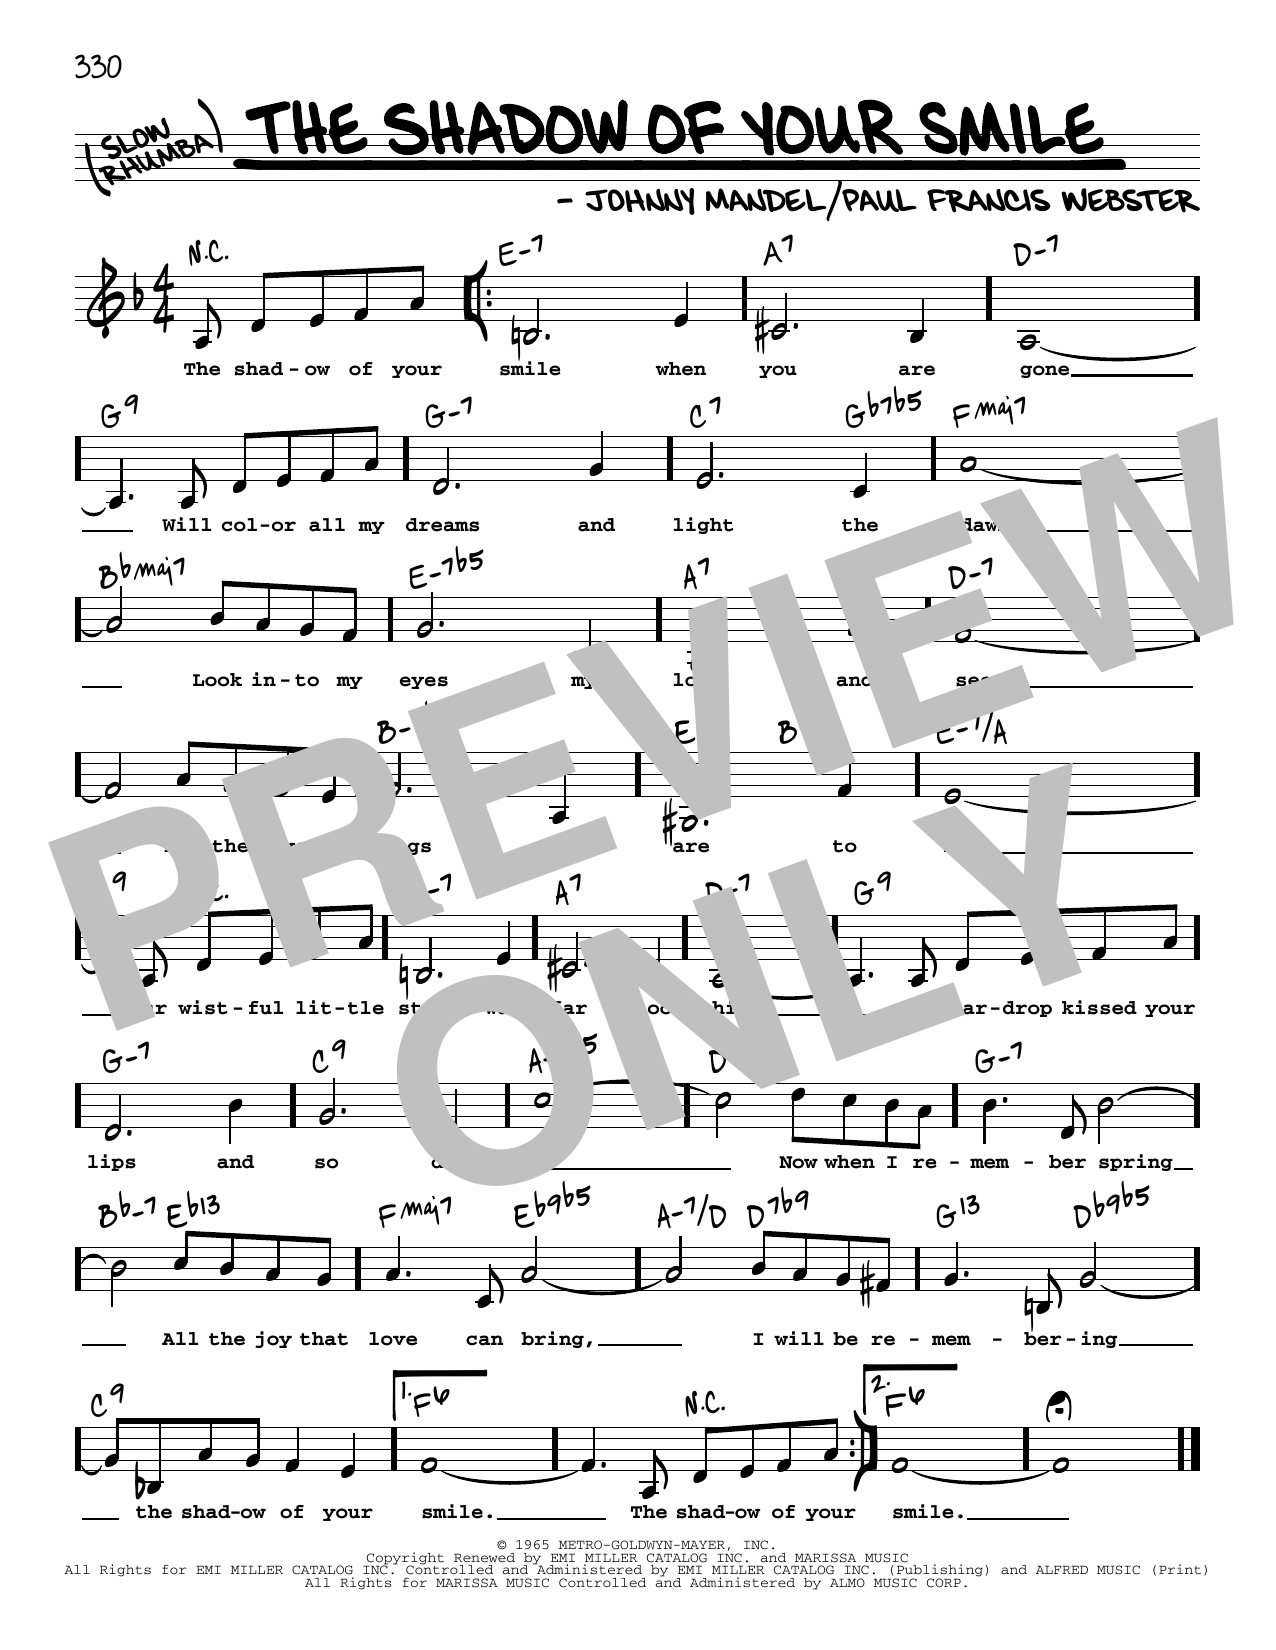 Download Johnny Mandel and Paul Francis Webst The Shadow Of Your Smile (Low Voice) Sheet Music